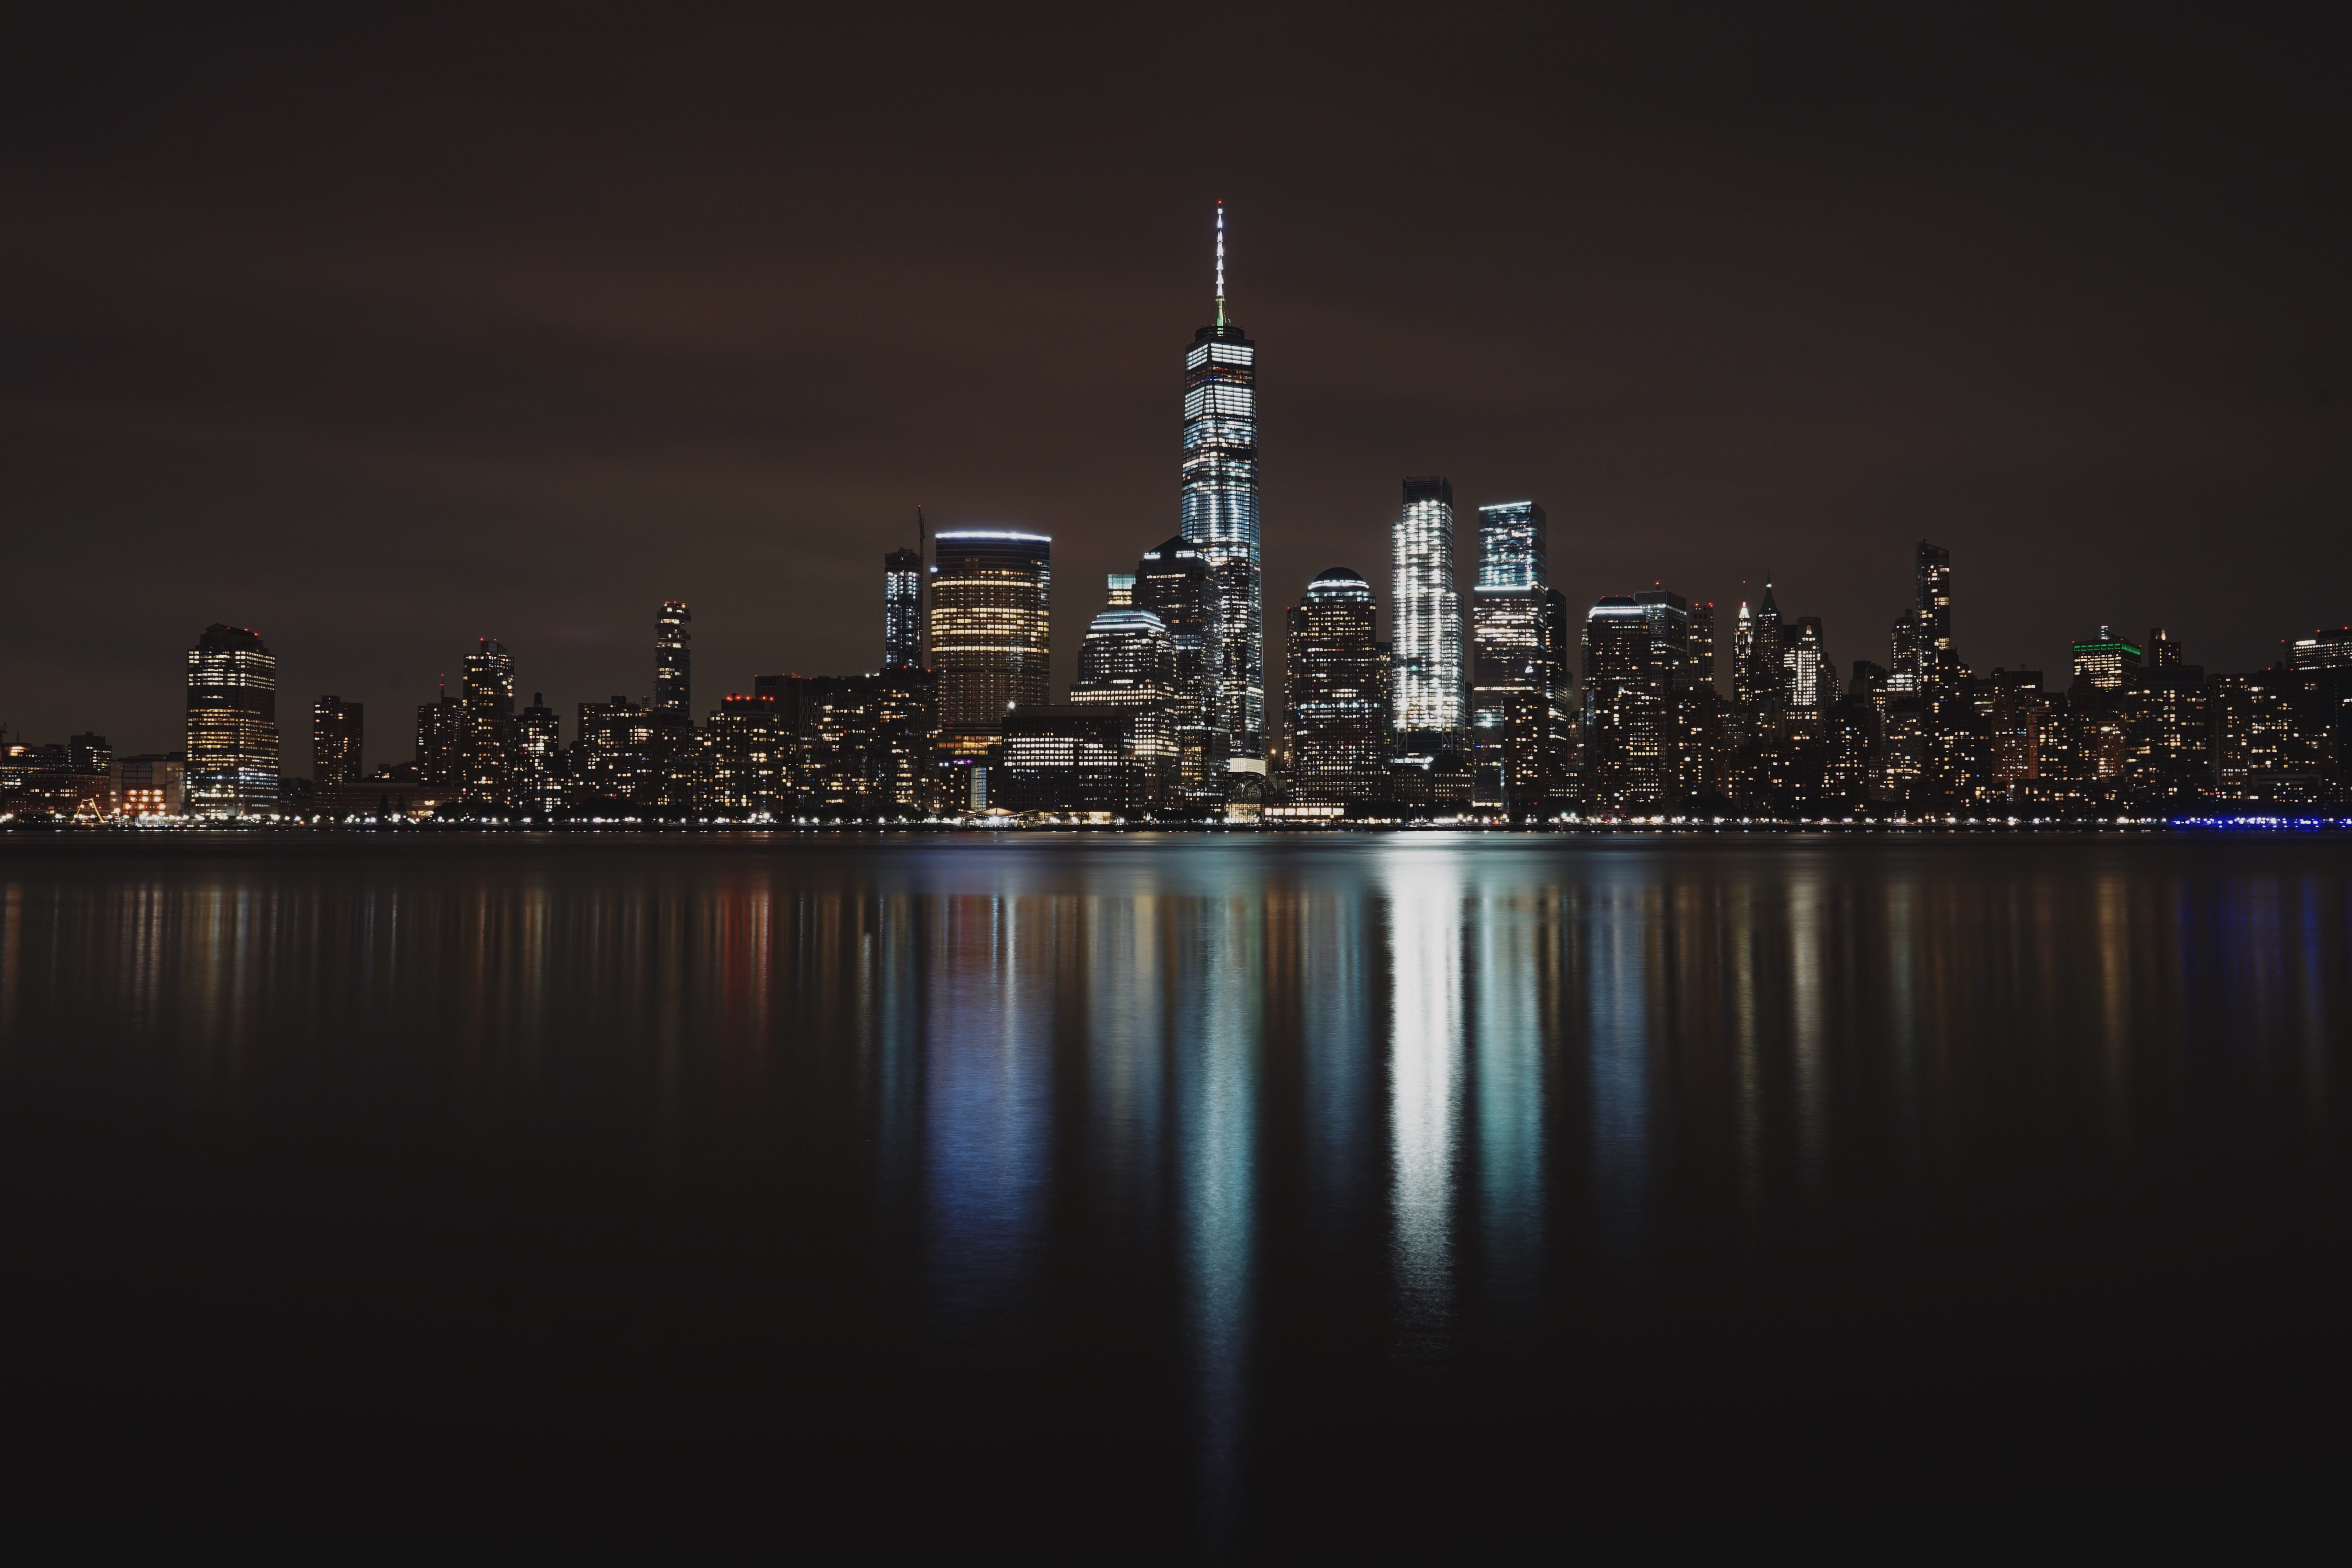 Photo of the New York City skyline and the lights from the building being reflected in water as an example of white balance for night sky photography